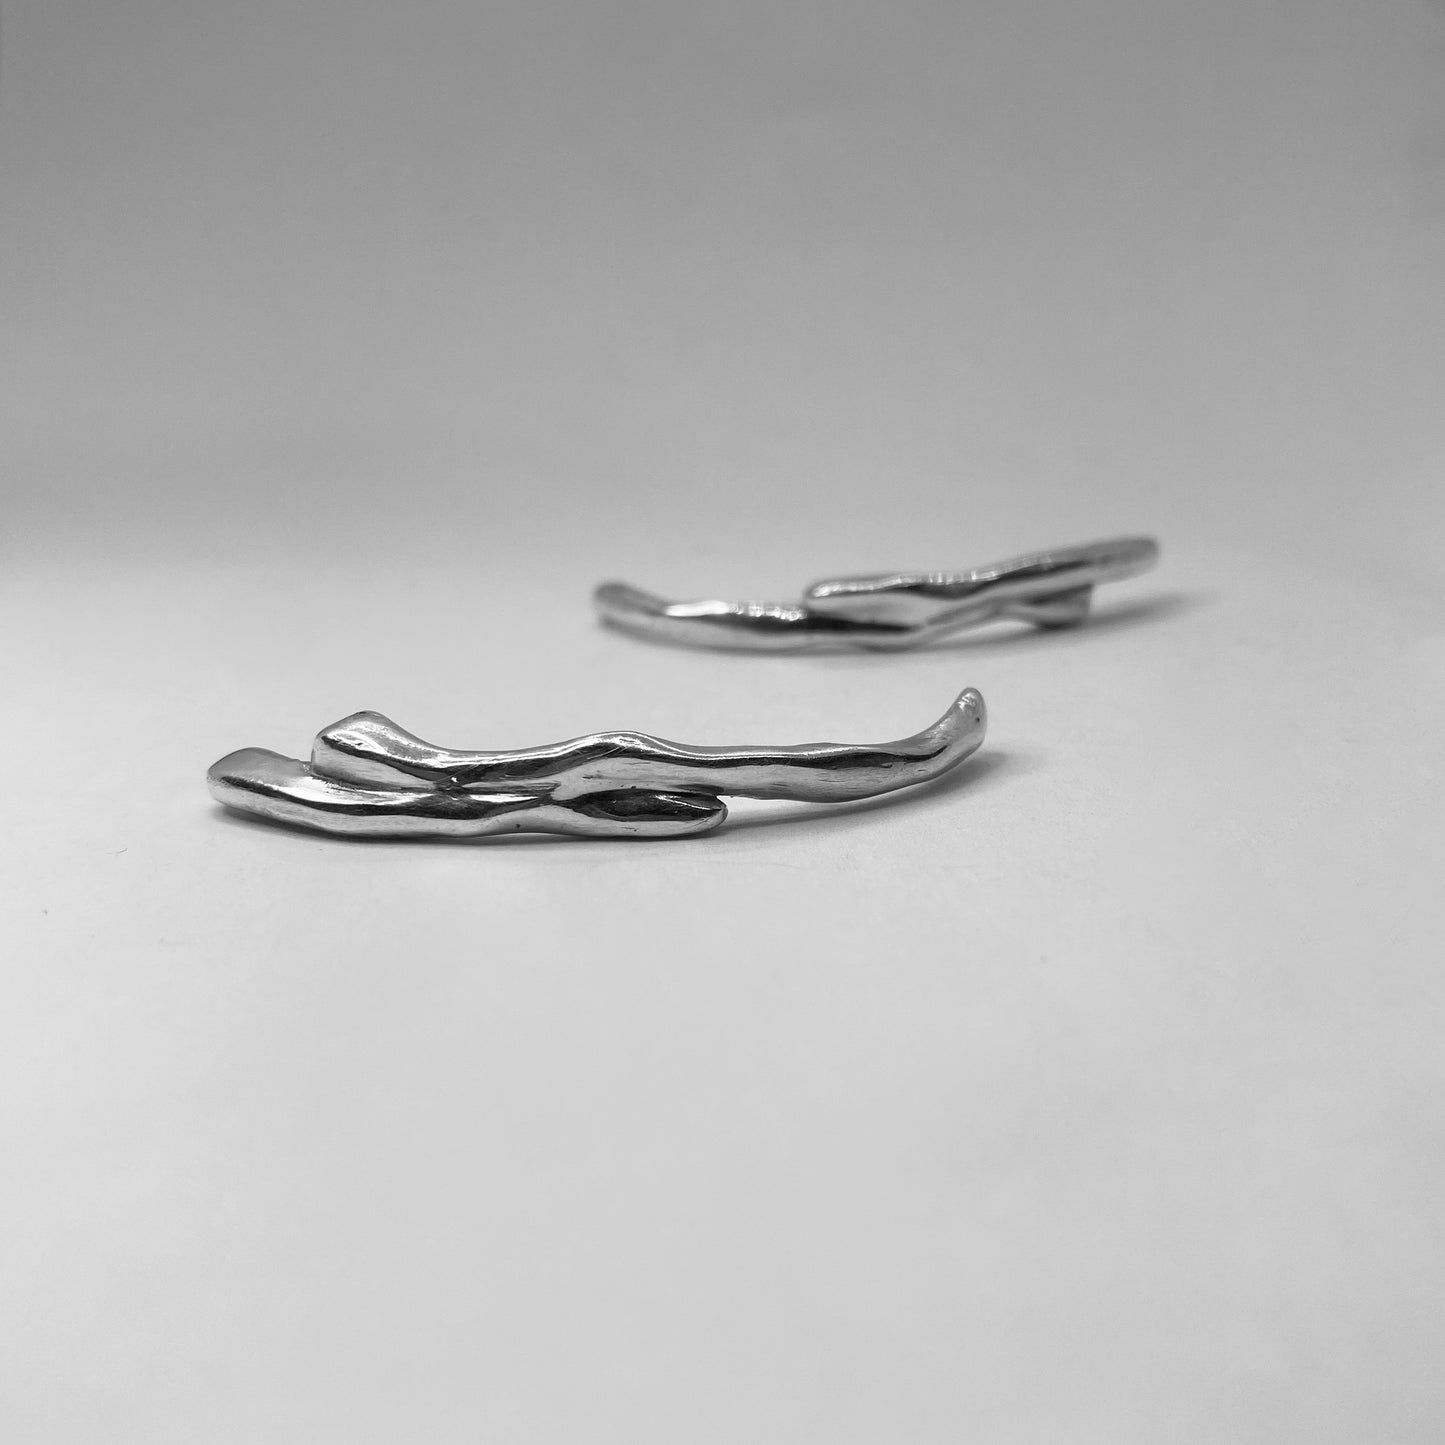 Handmade earrings crafted from sterling silver 925.